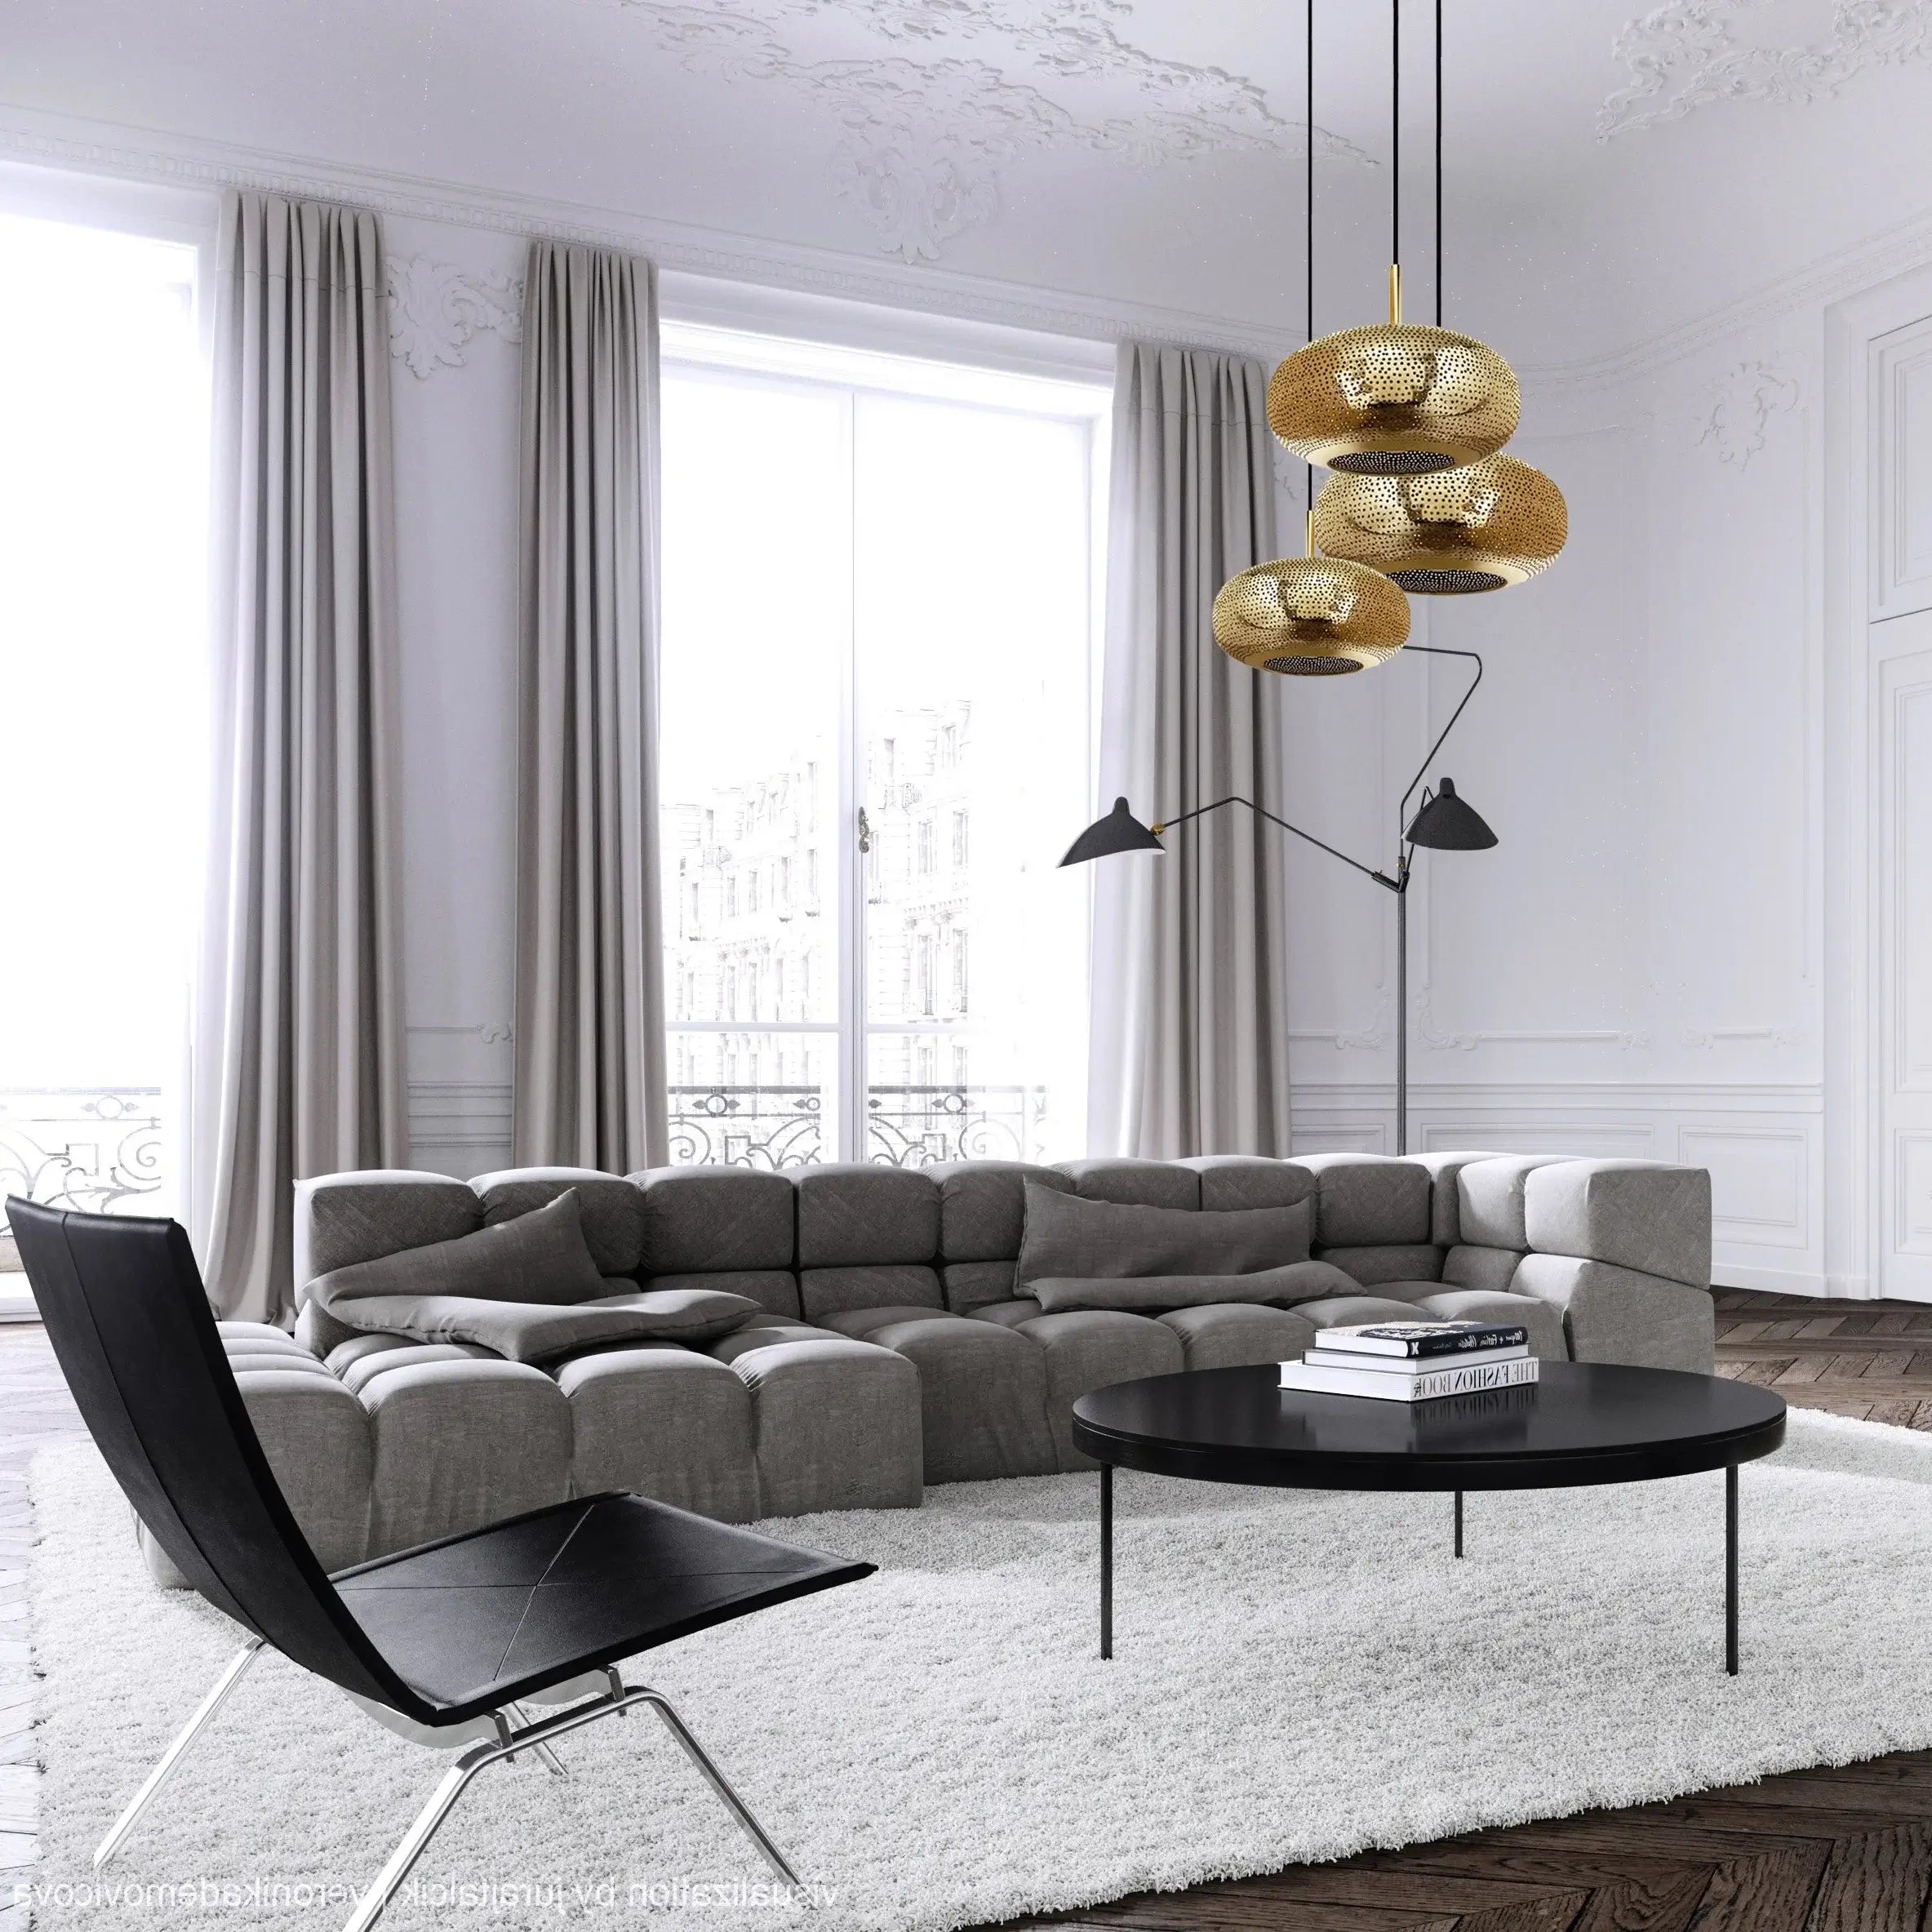 Dounia home chandelier in Polished brass made of Metal, used as a living room lighting, Model: Lila 3